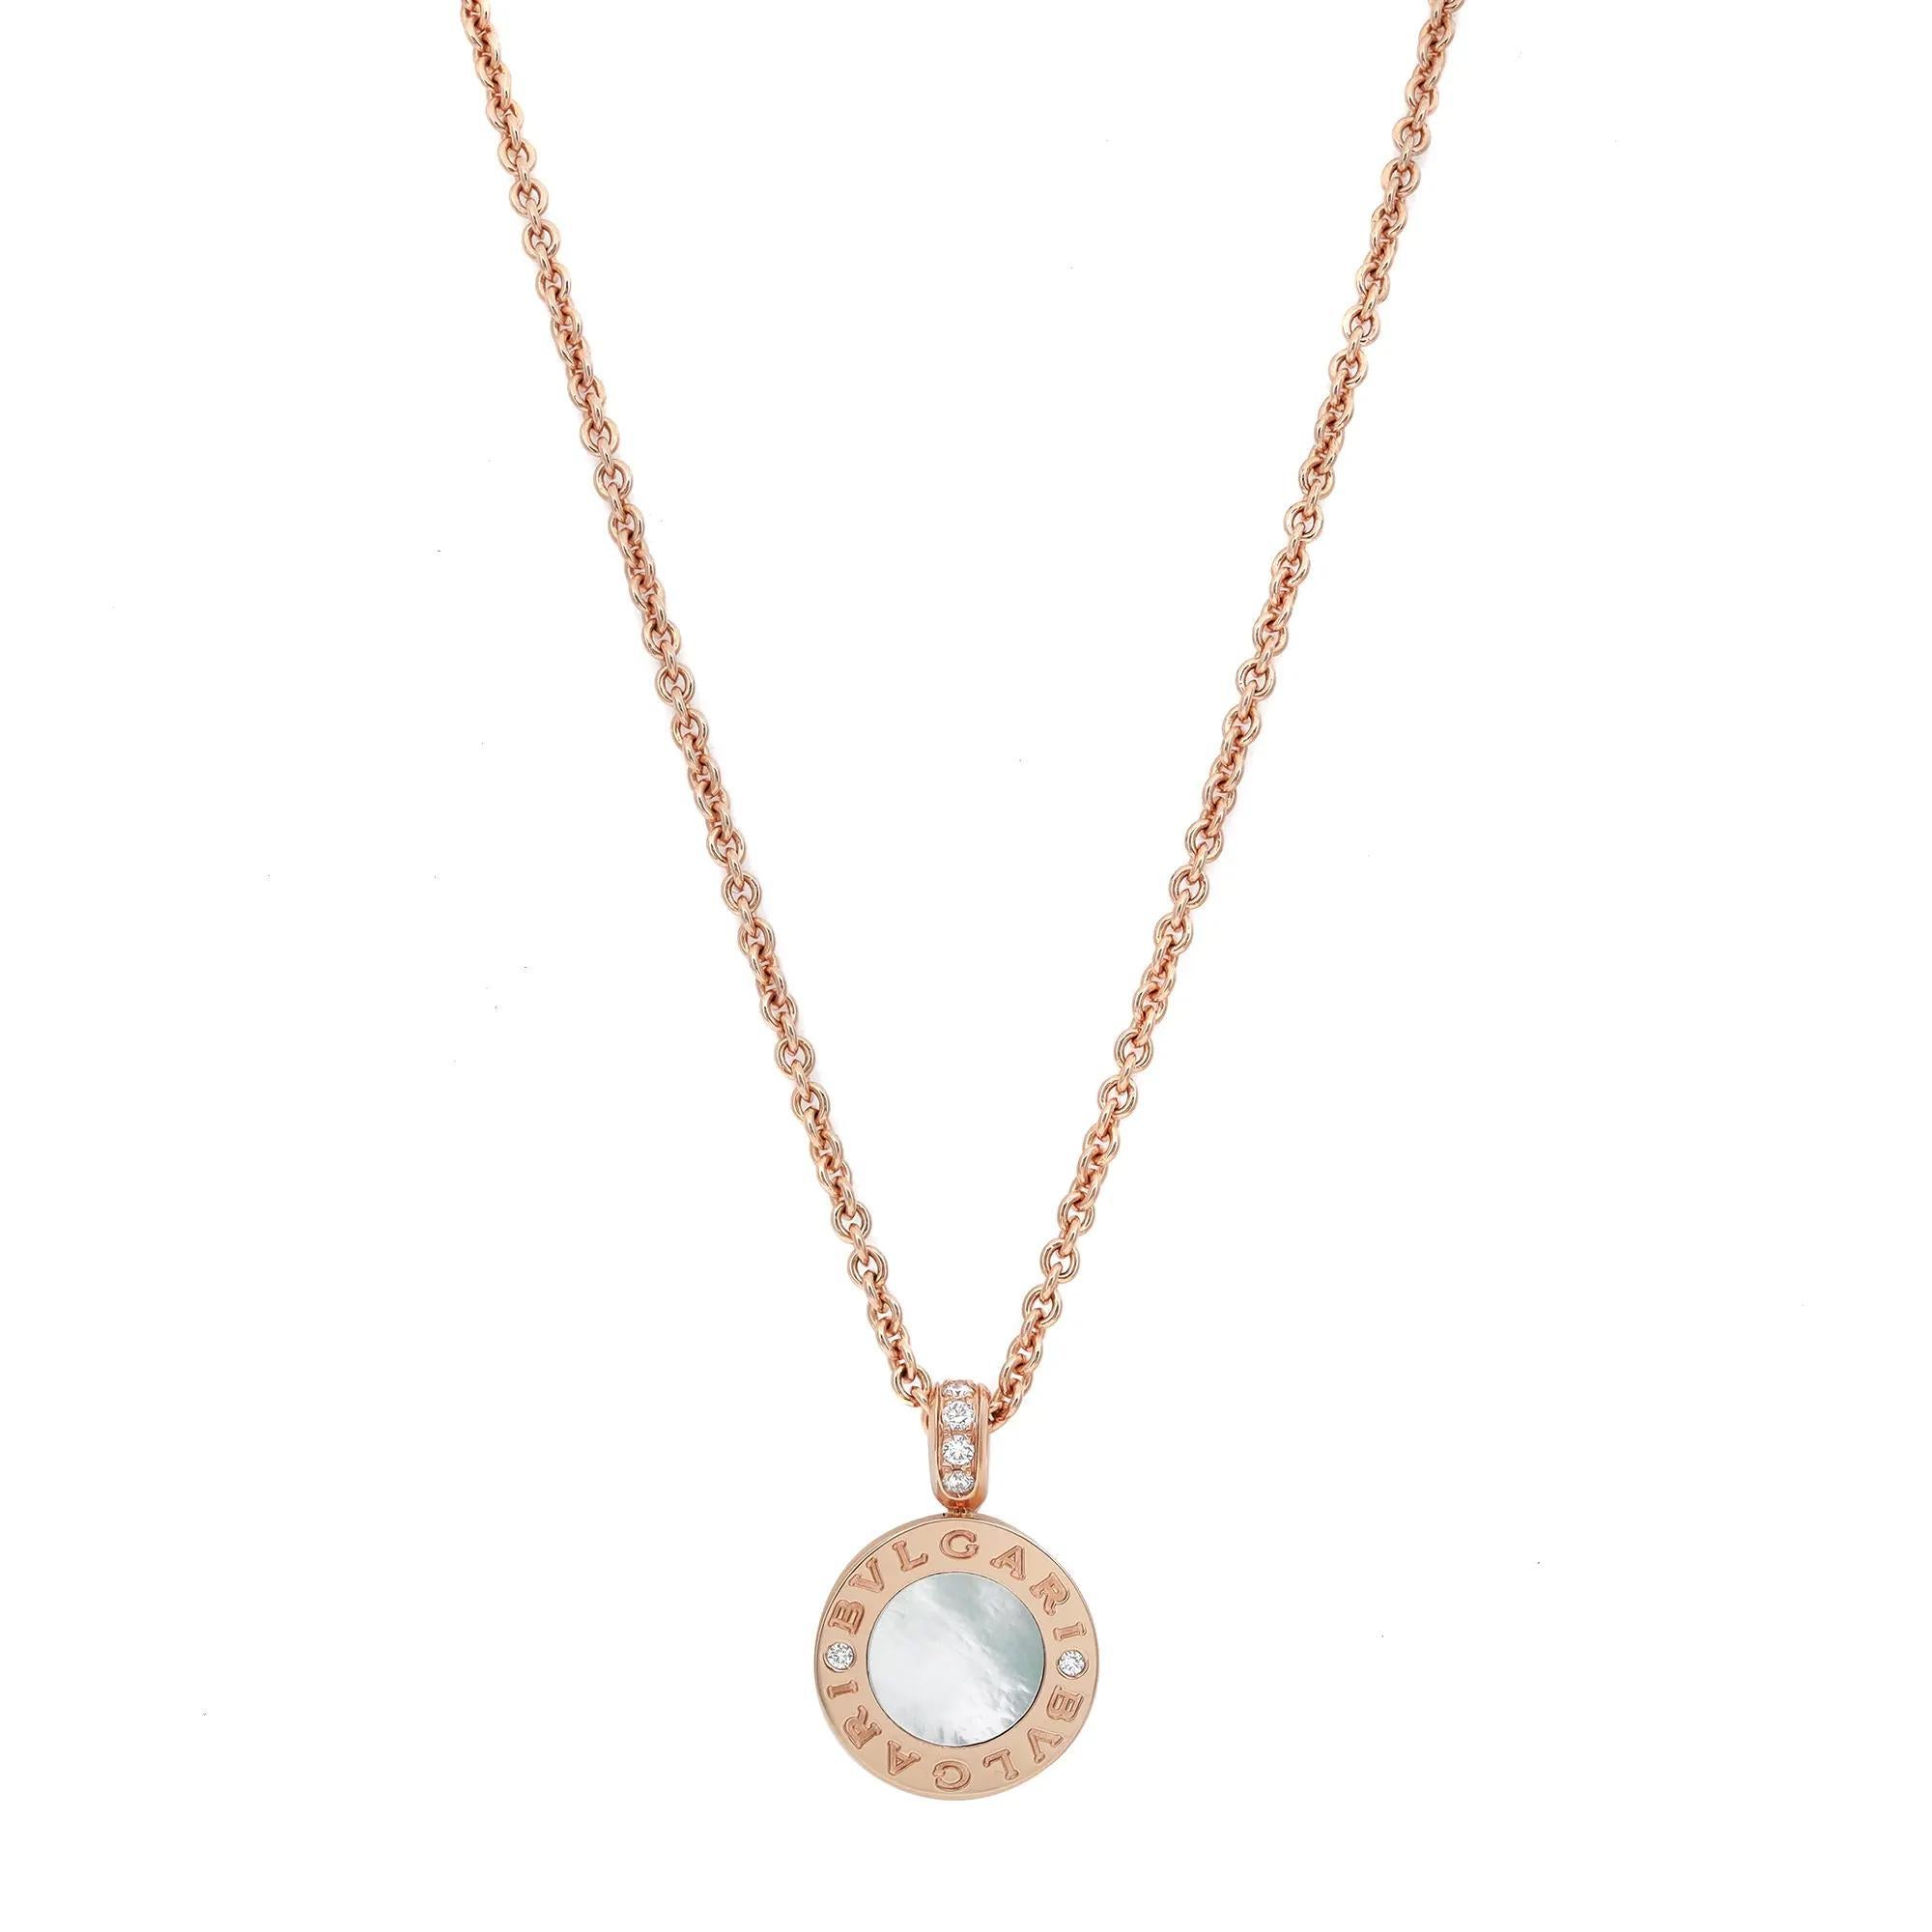 An elegant fusion of culture and modernity, this BVLGARI BVLGARI pendant necklace is crafted in lustrous 18K rose gold. It features a round pendant with Bvlgari logo engraving and round cut diamonds on both sides framing gemstones like Onyx and